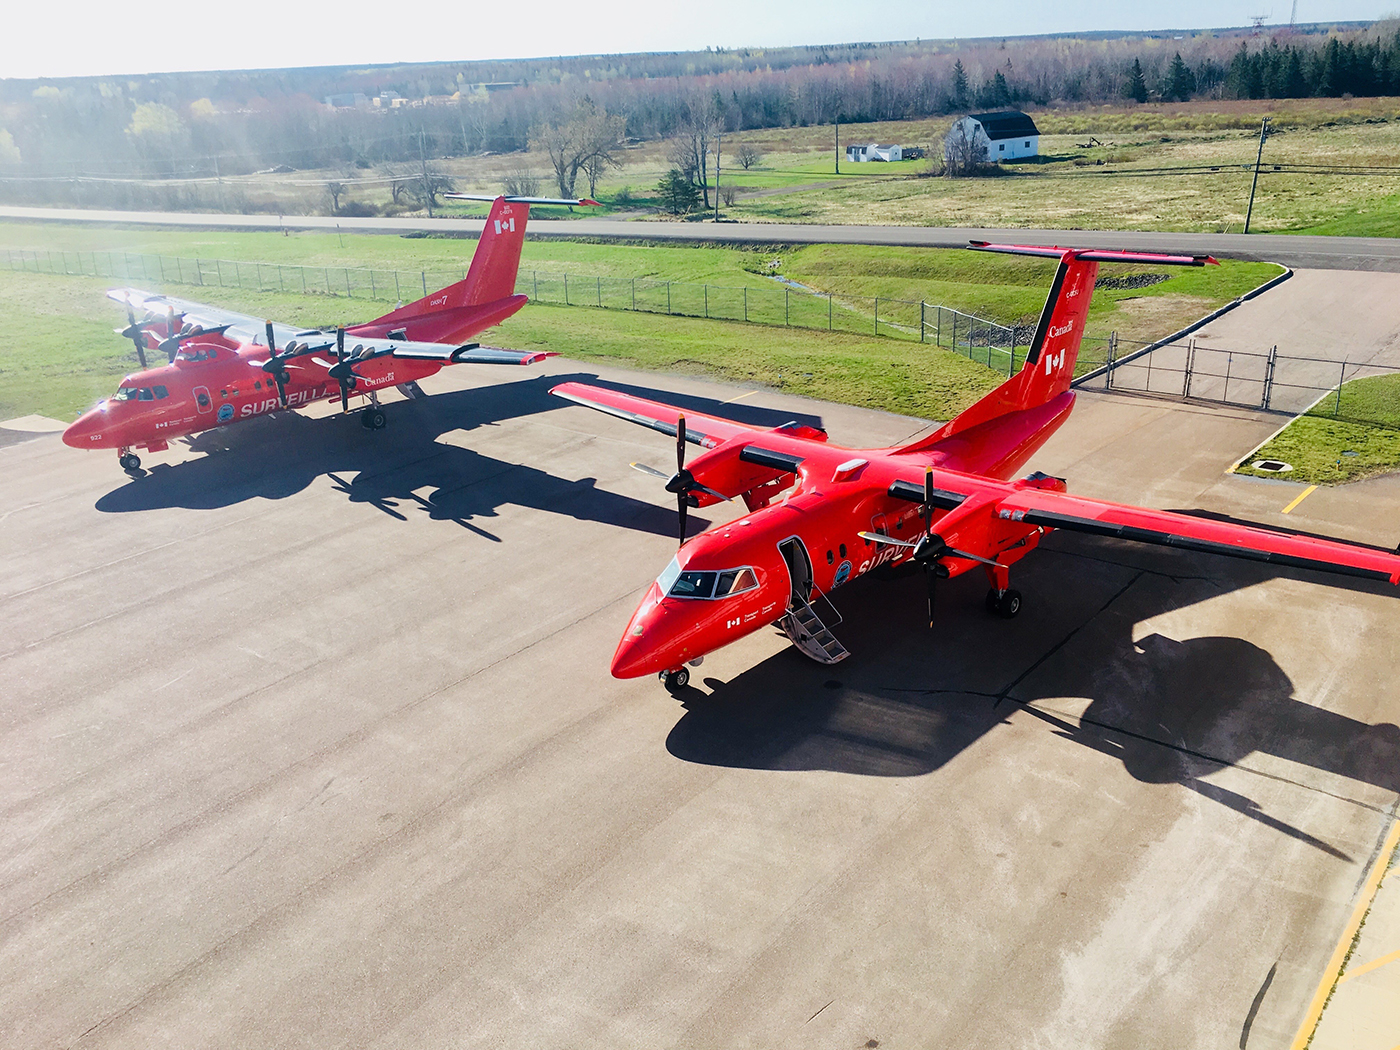 two NASP planes parked side by side in an airfield in Moncton, NB.